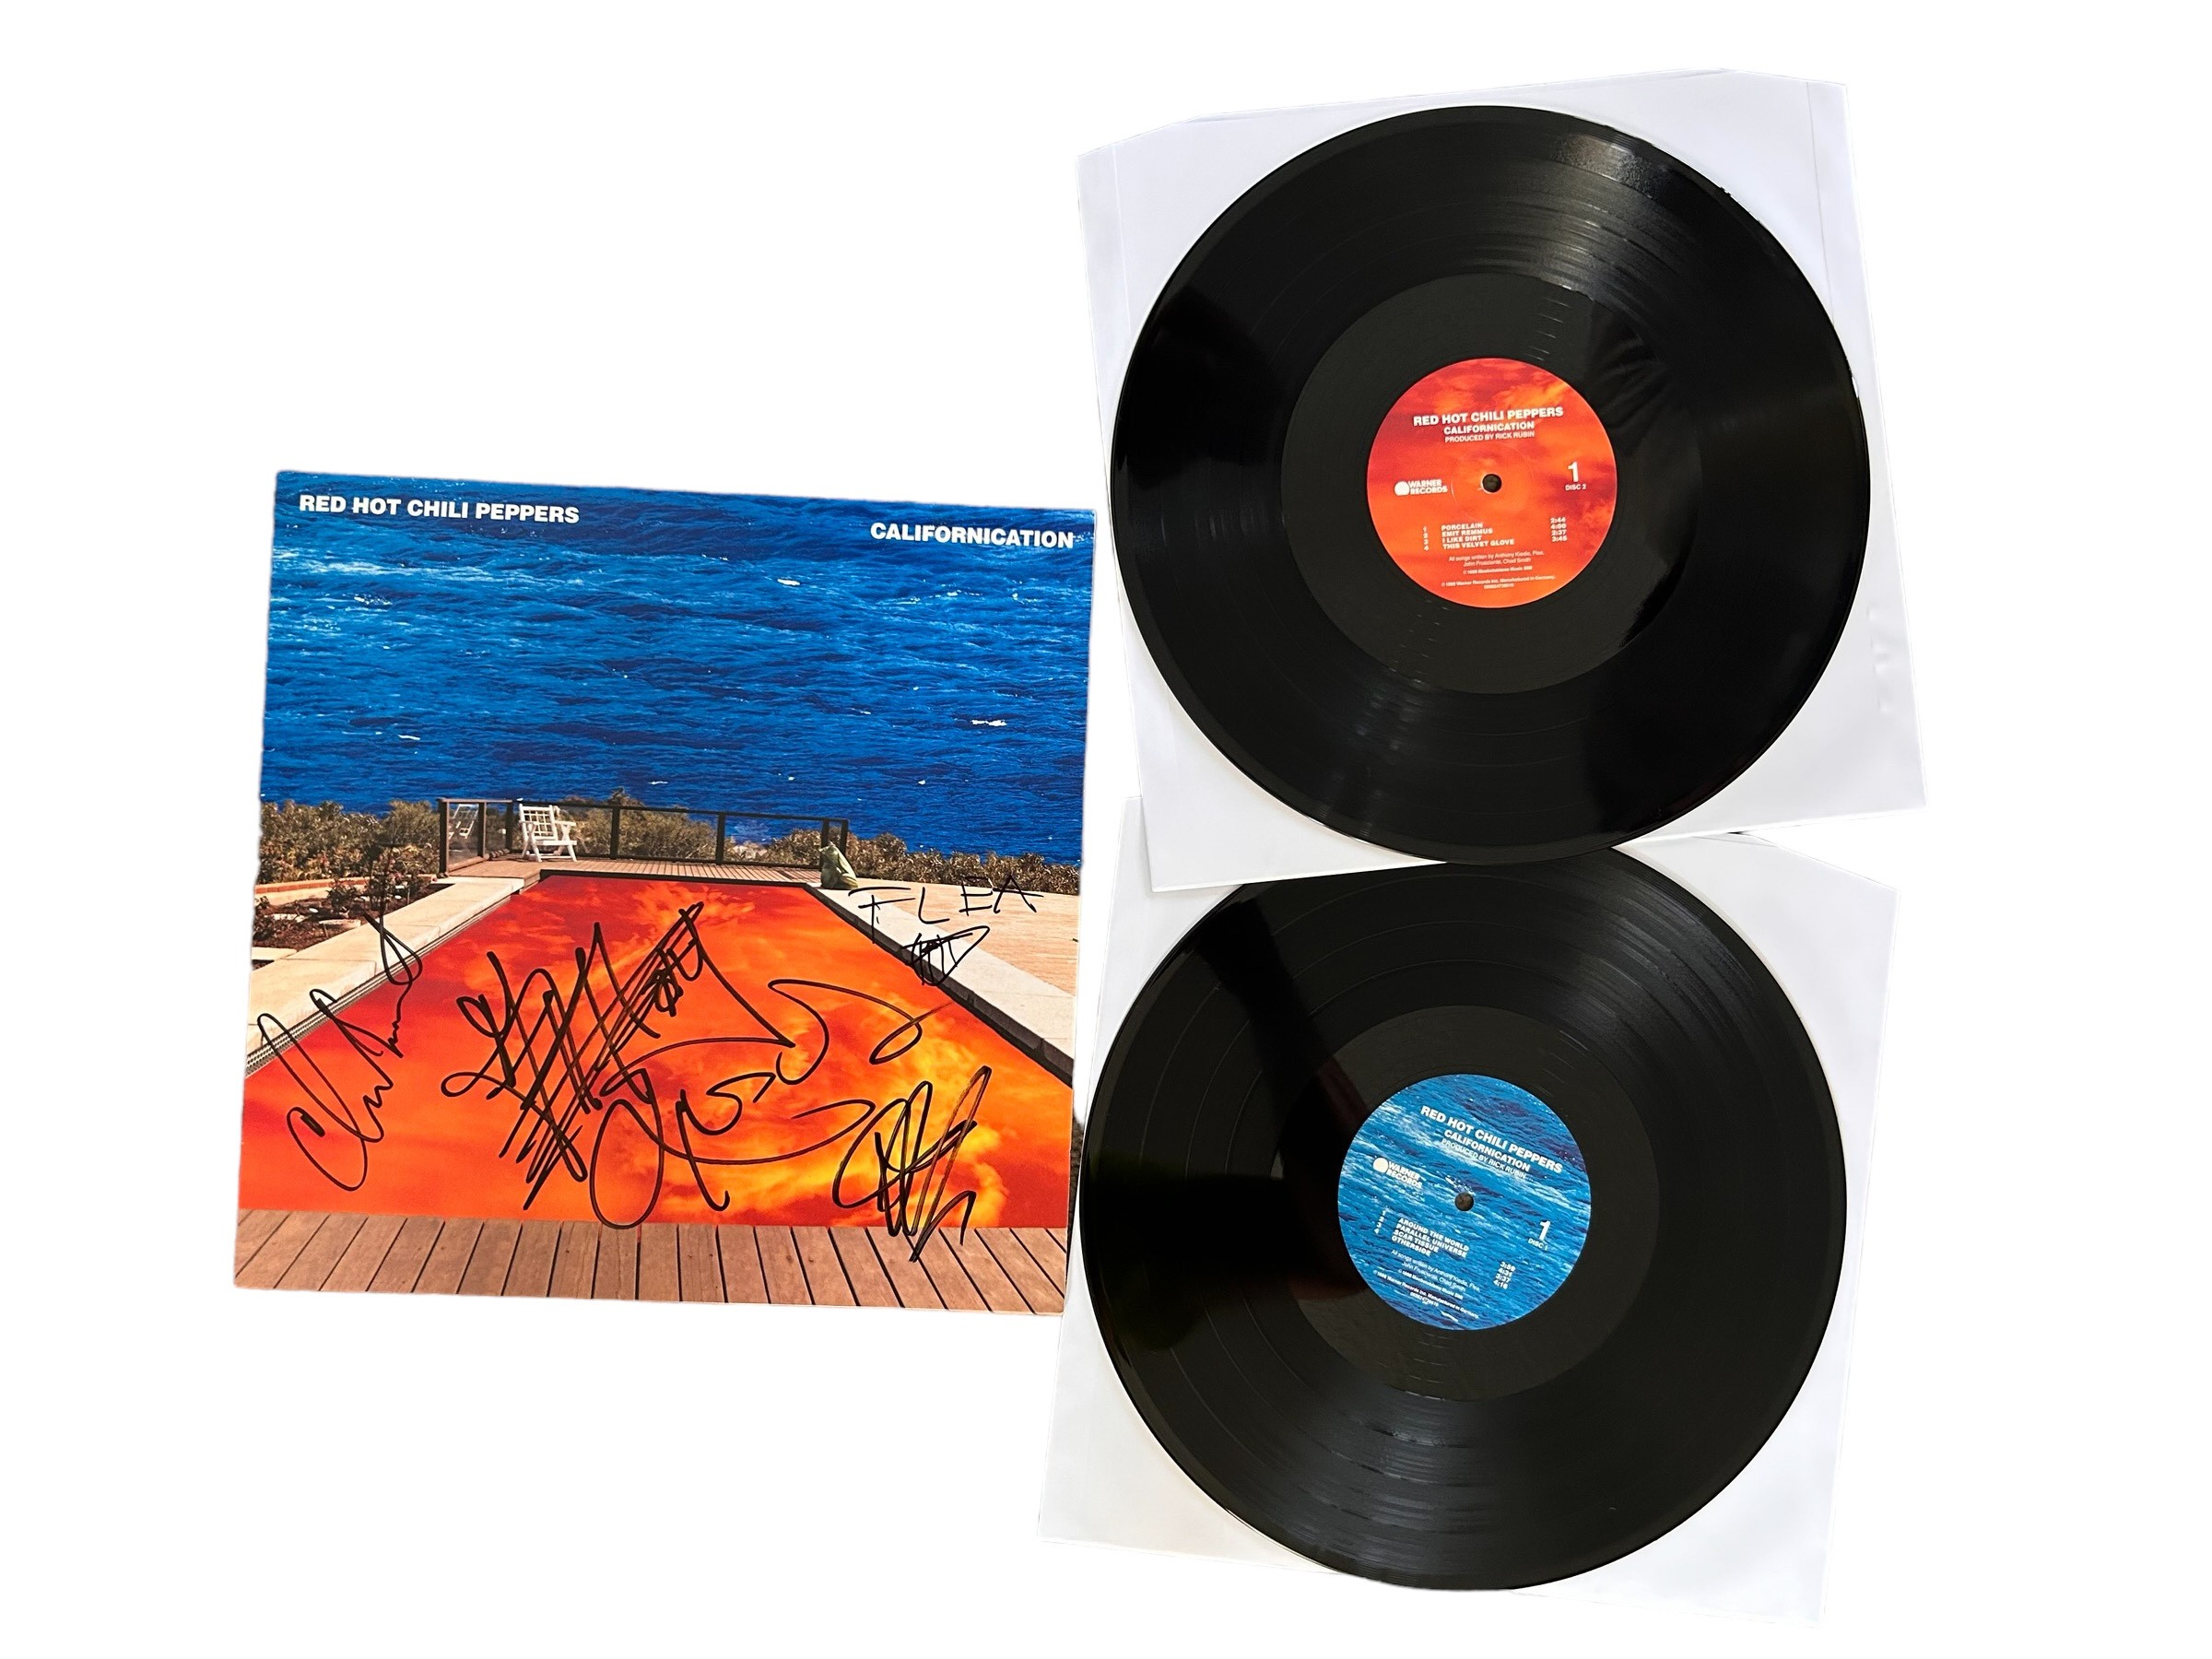 Flea Signed Red Hot Chili Peppers Californication LE Vinyl Record Album  Inscribed Love (PSA Hologram)